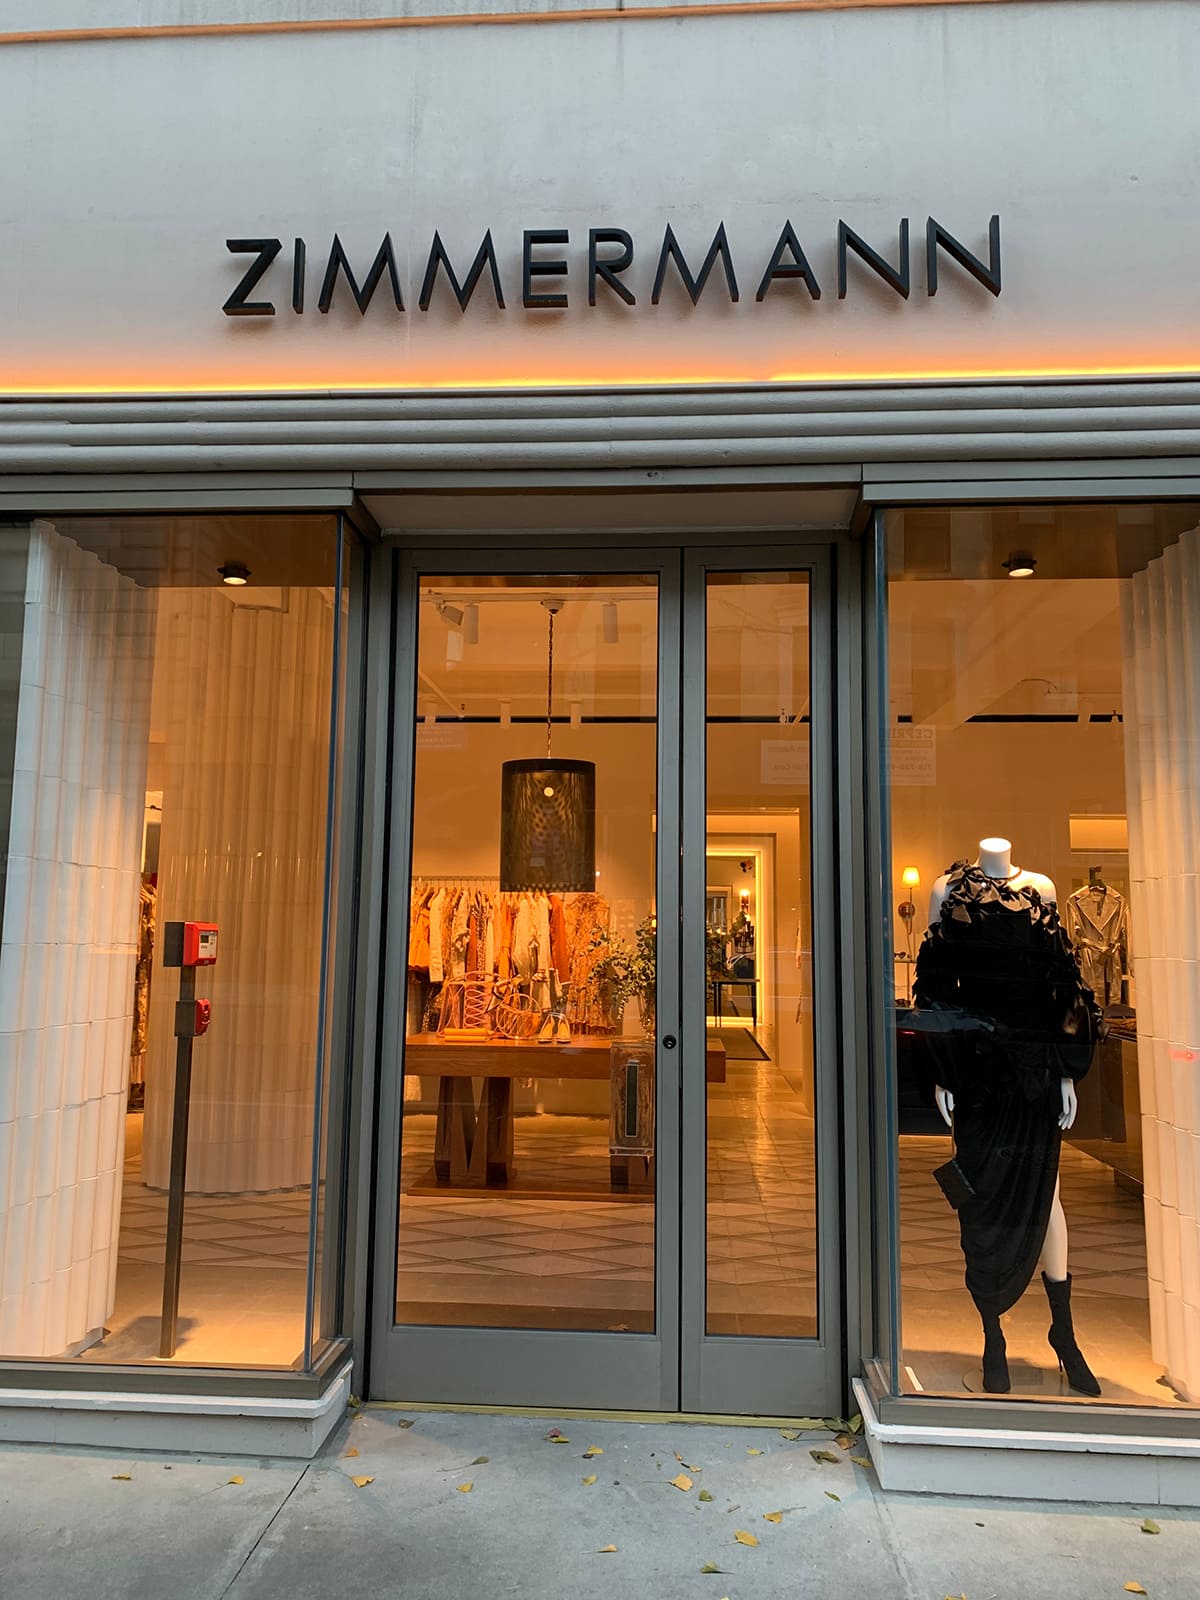 Zimmermann is a mid-level luxury fashion brand with an influential celebrity following